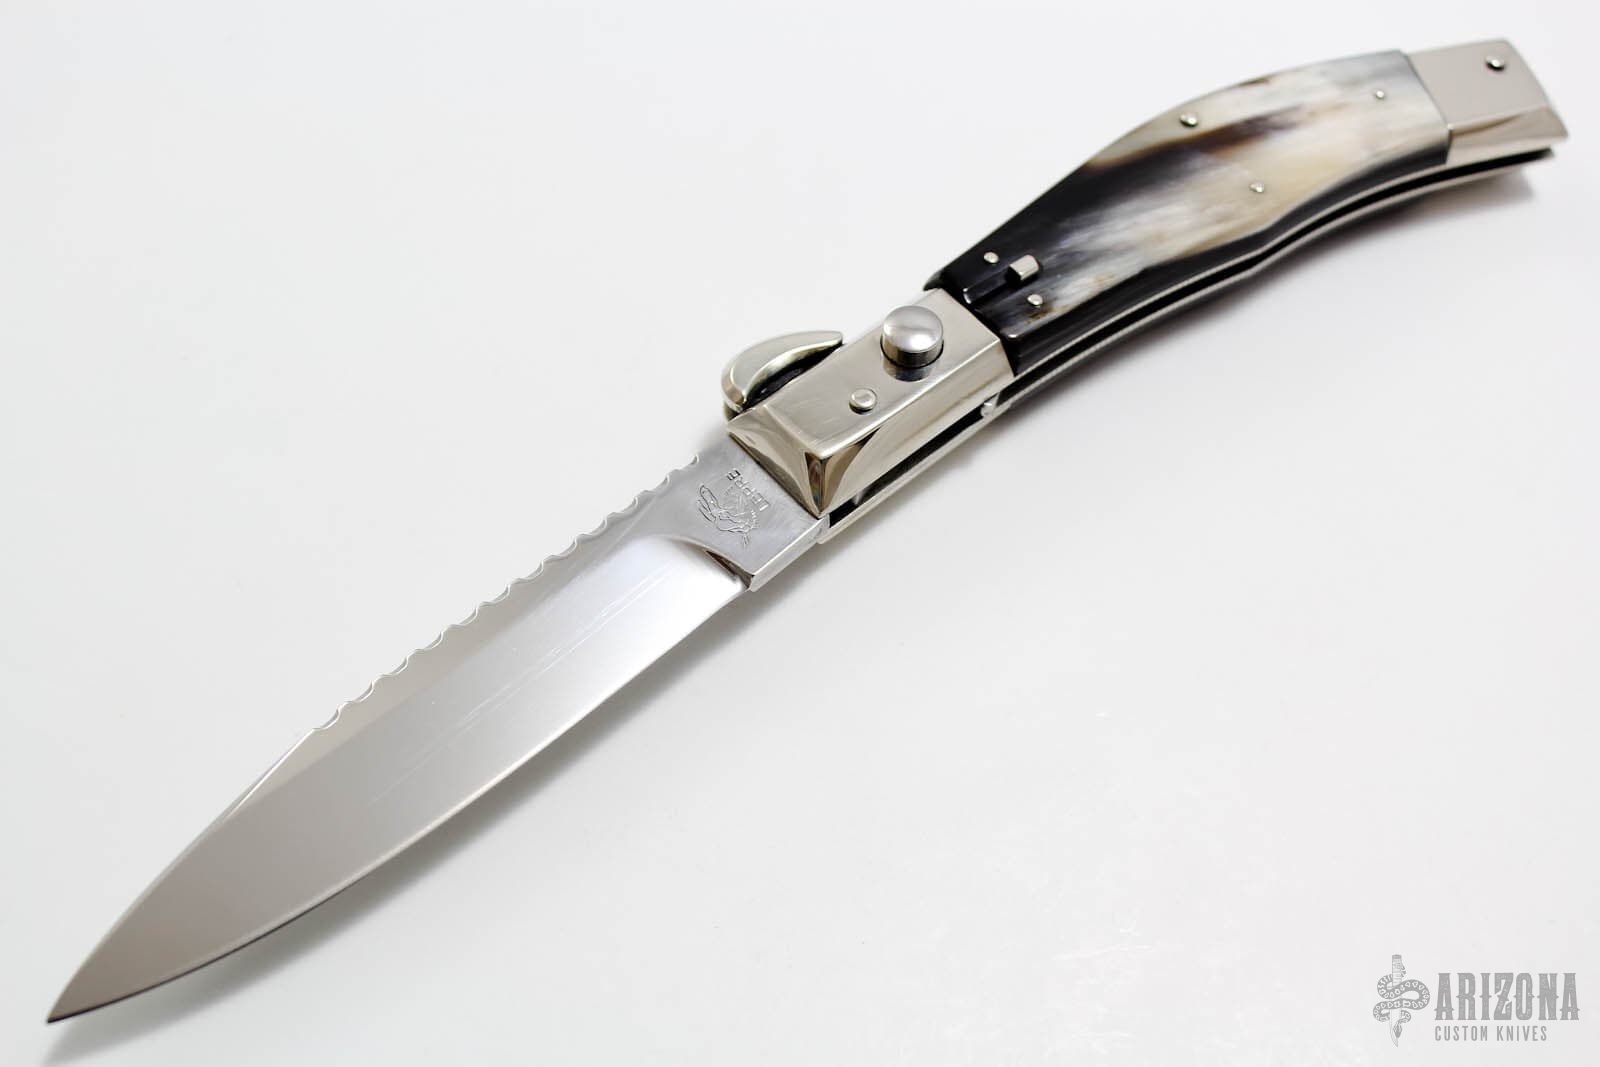 Possession of a Switchblade Knife Laws - California Penal Code Section 21510